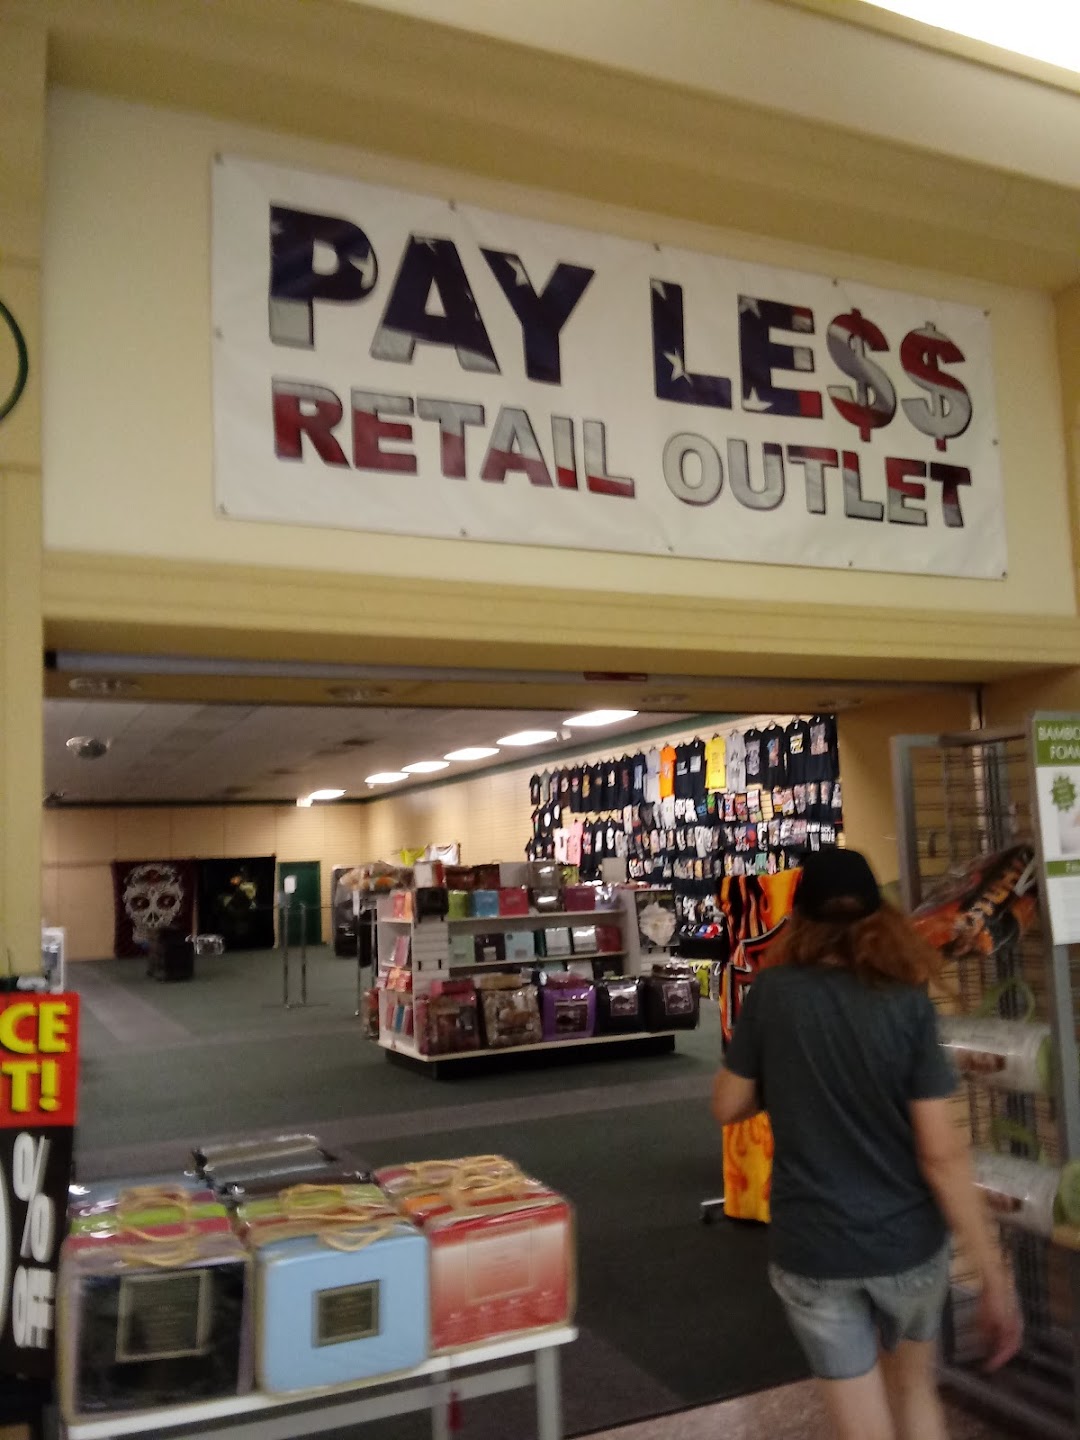 Payless Retail Outlet